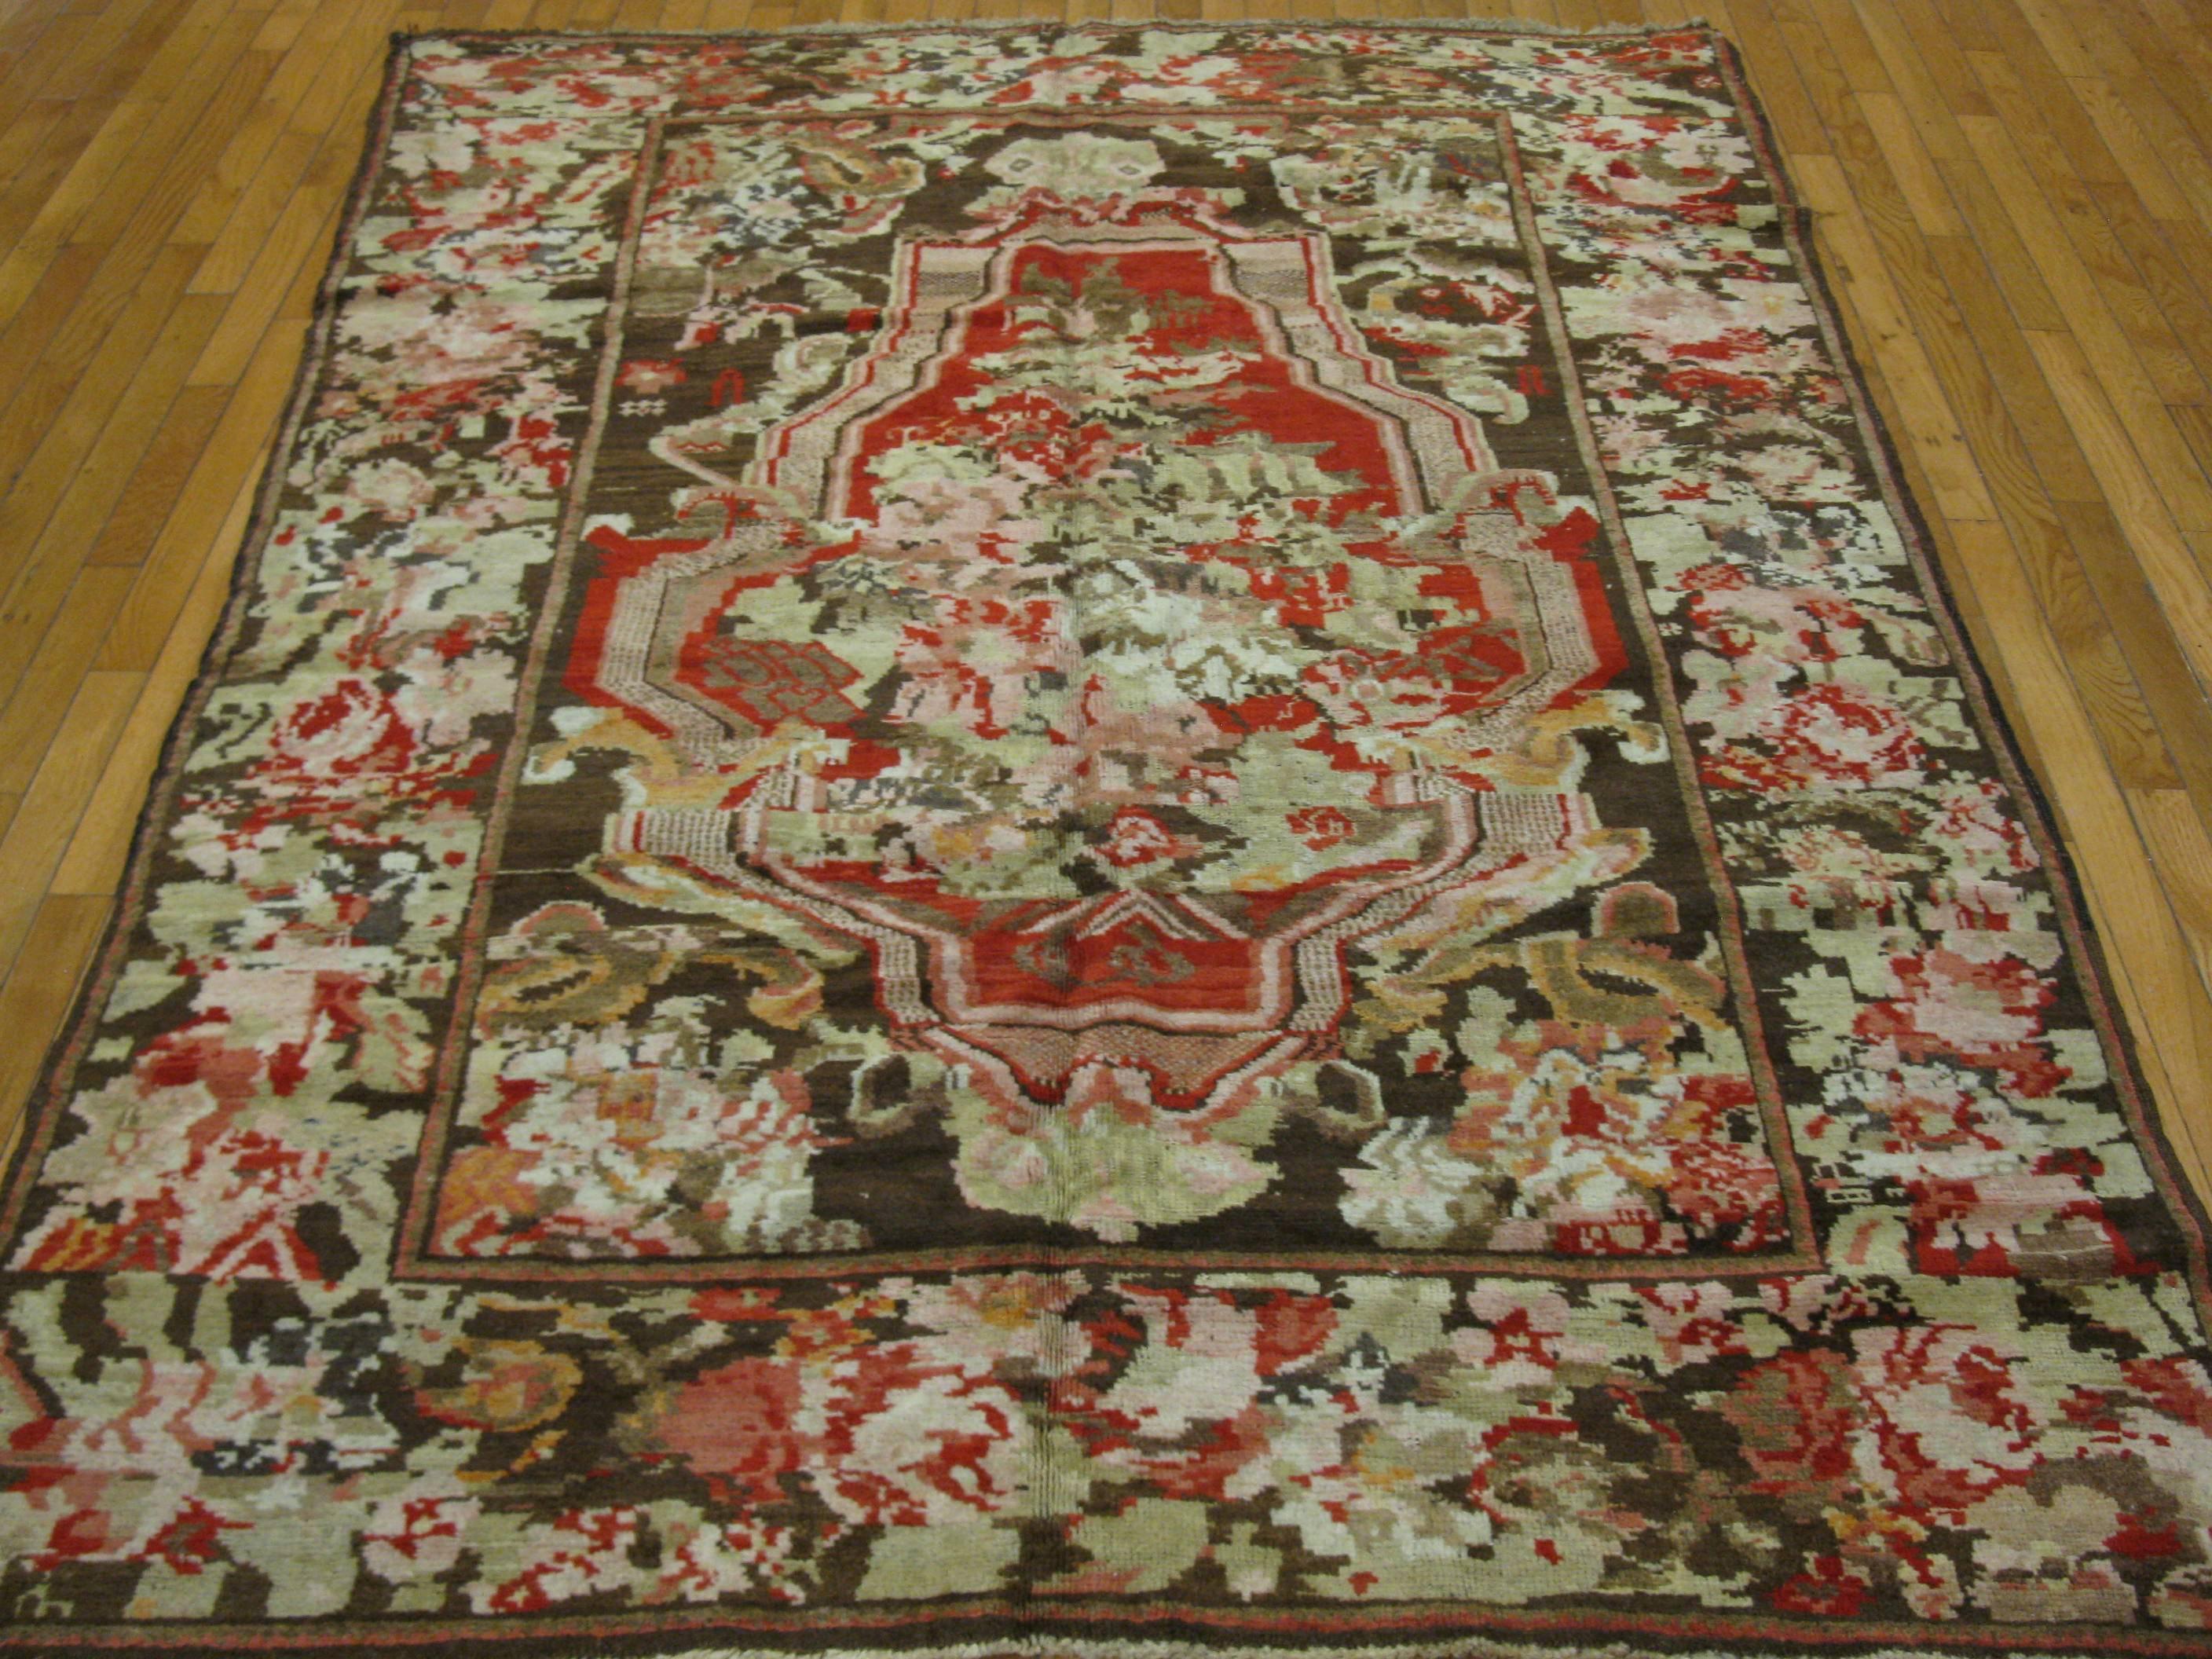 This is a beautiful small hand-knotted antique Karabaq rug from the Caucuses. It has rich natural dye colors with a country French style design. The rug measures 5' 4